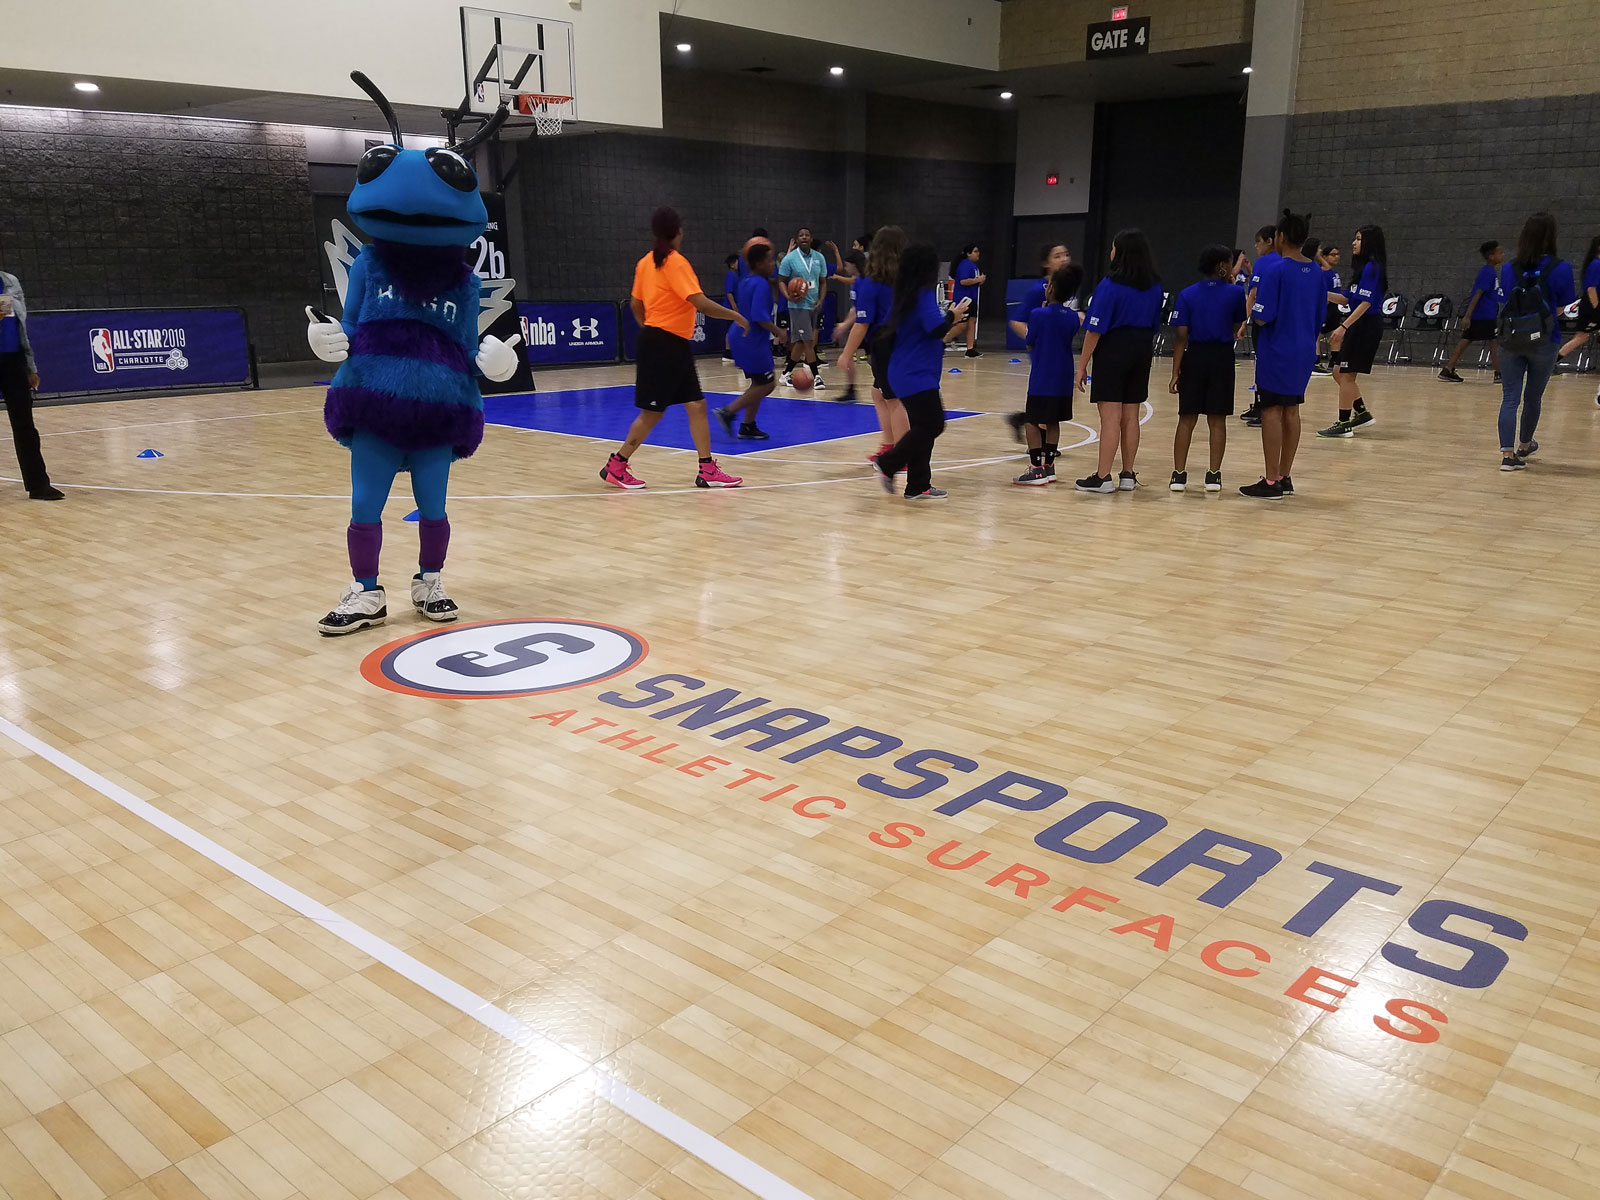 Hugo the Hornet giving thumbs up next to the SnapSports logo